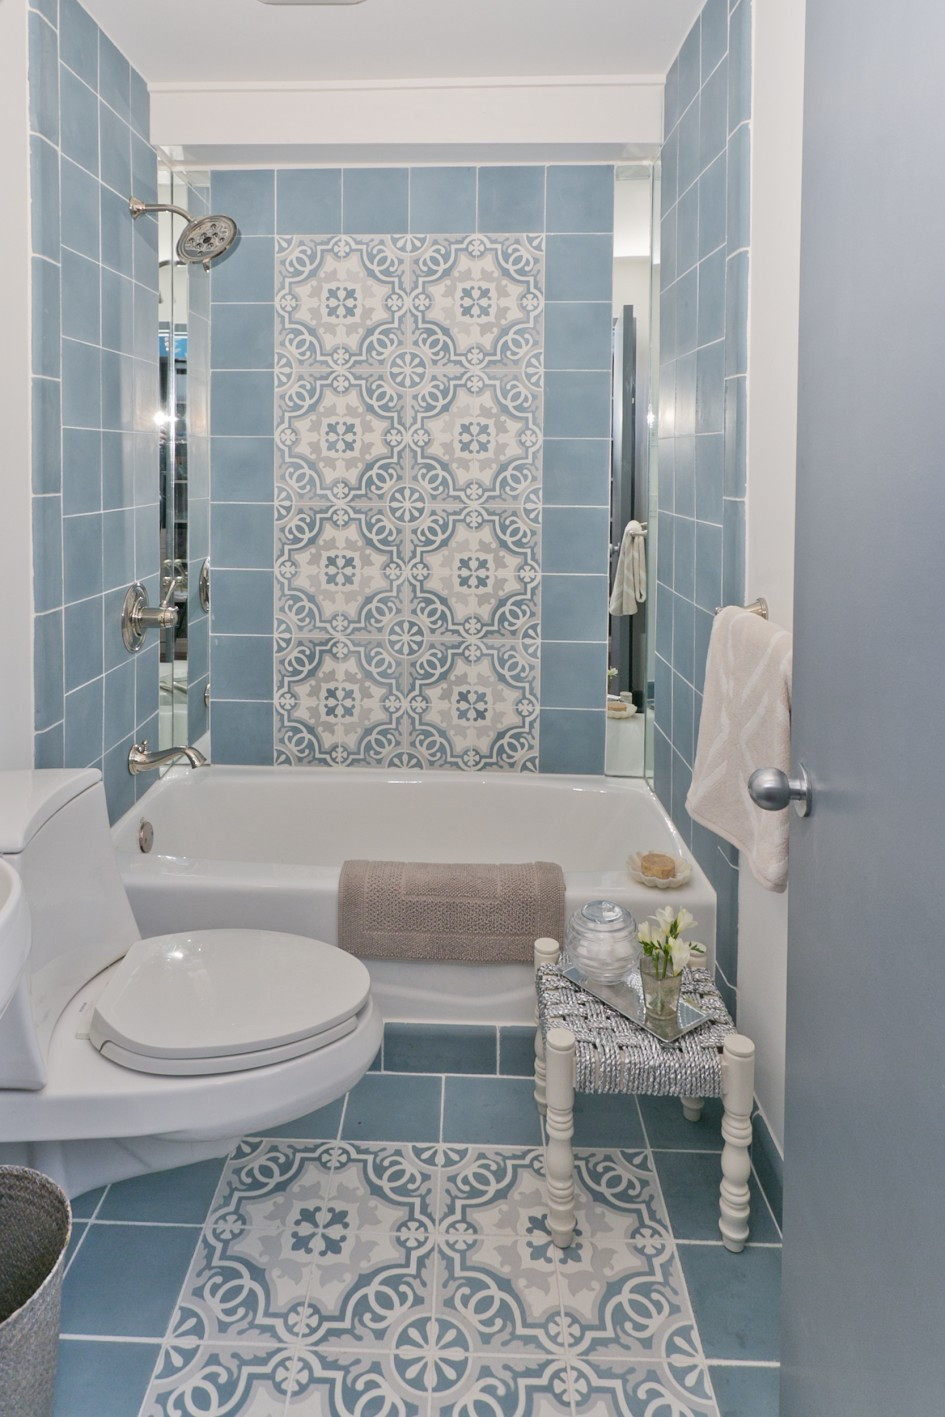 Bathroom Tiles Design Images
 30 great pictures and ideas of old fashioned bathroom tile